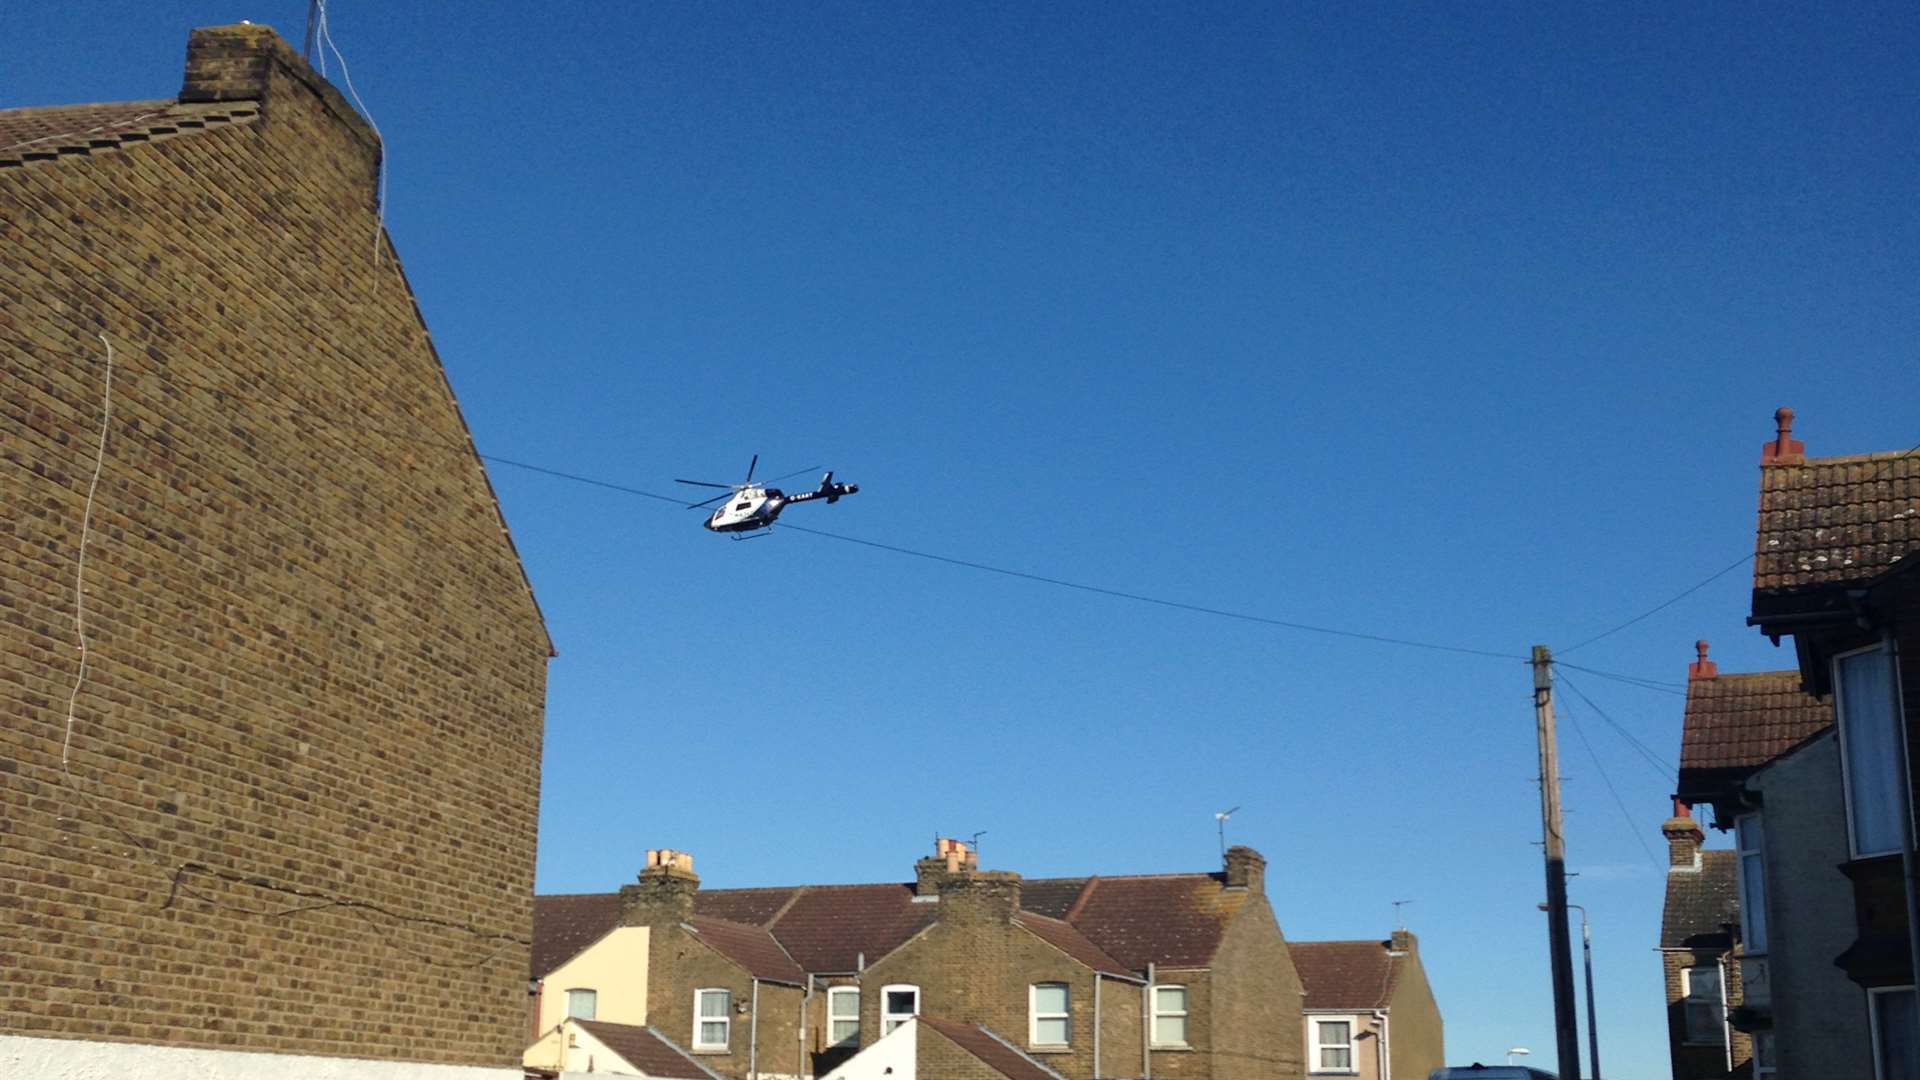 The air ambulance flies off from the scene